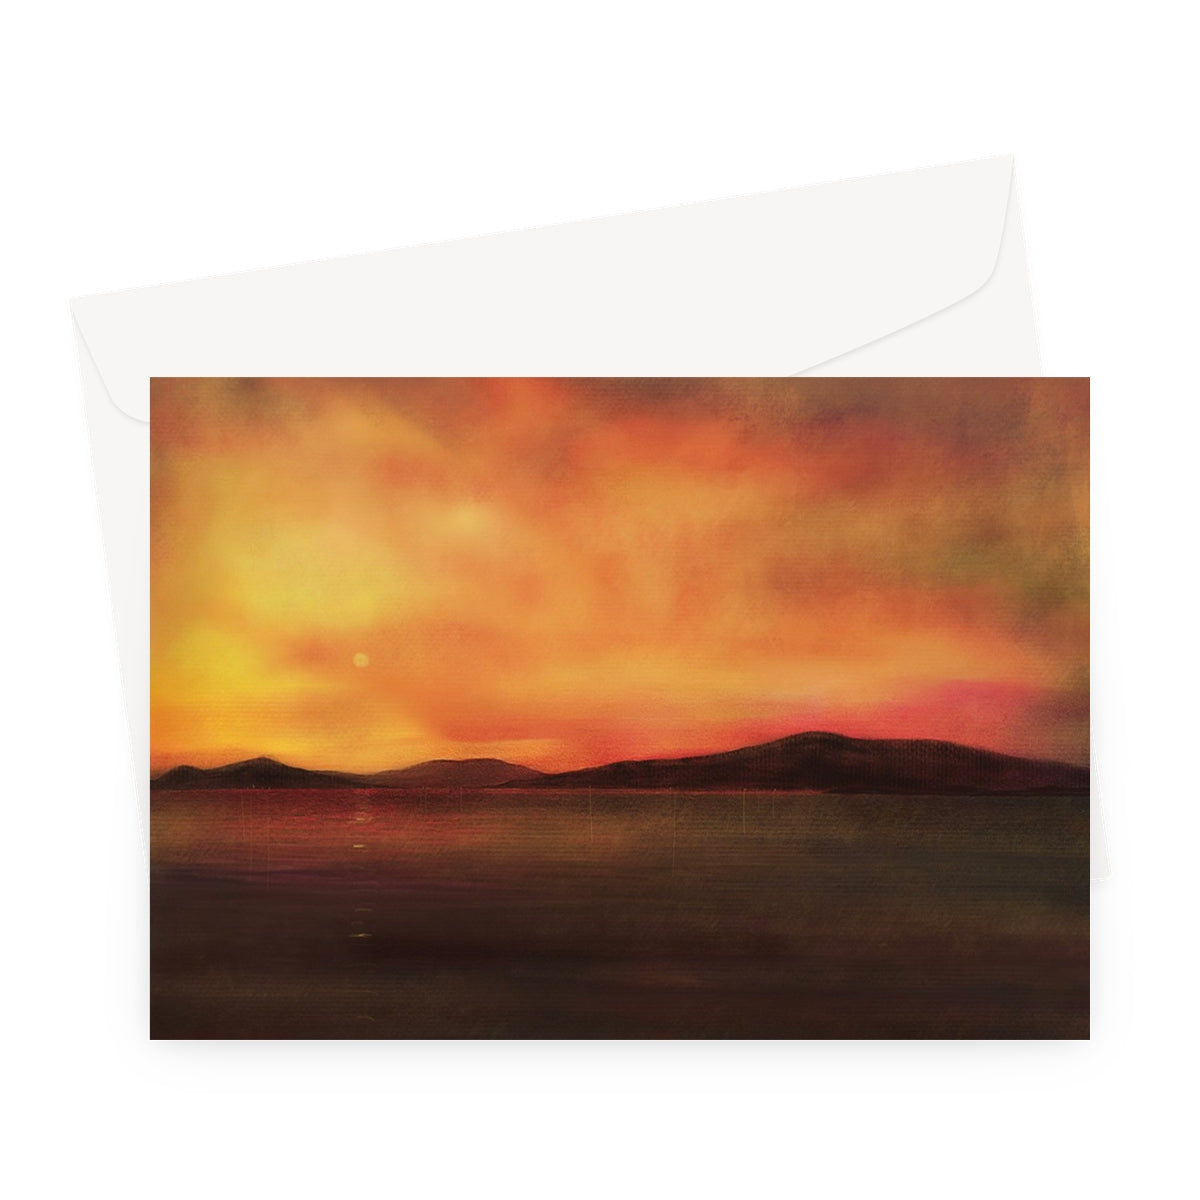 Harris Sunset Art Gifts Greeting Card-Greetings Cards-Hebridean Islands Art Gallery-A5 Landscape-1 Card-Paintings, Prints, Homeware, Art Gifts From Scotland By Scottish Artist Kevin Hunter